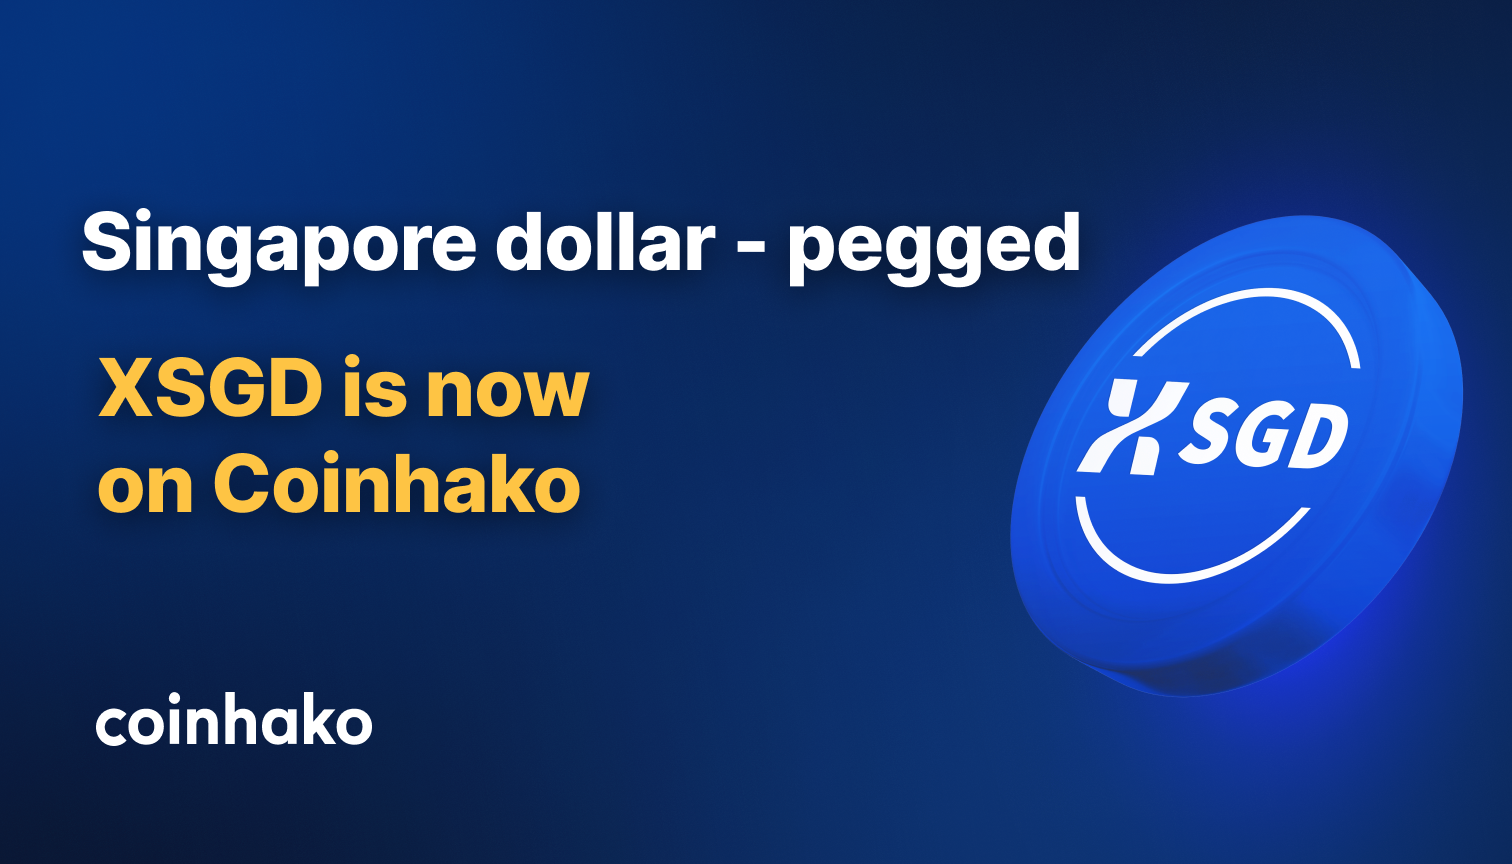 XSGD now available on Coinhako